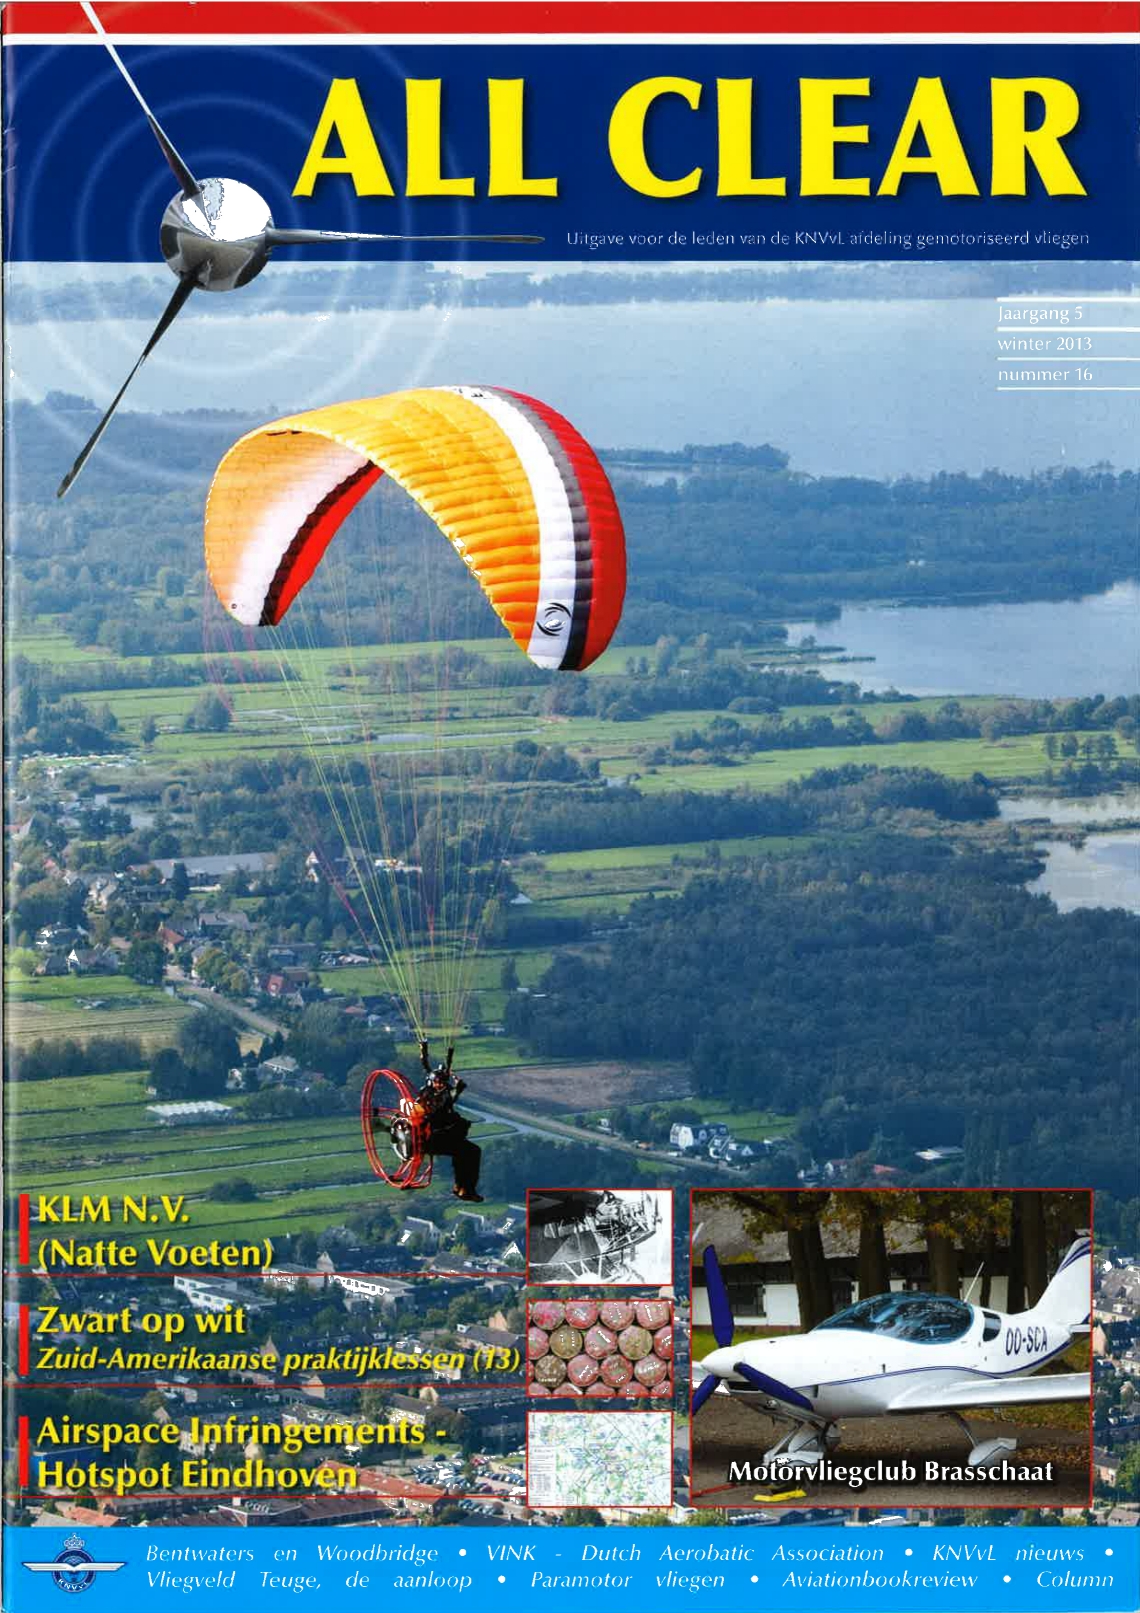 cover of the magazine all clear showing an ultralight flying over holland